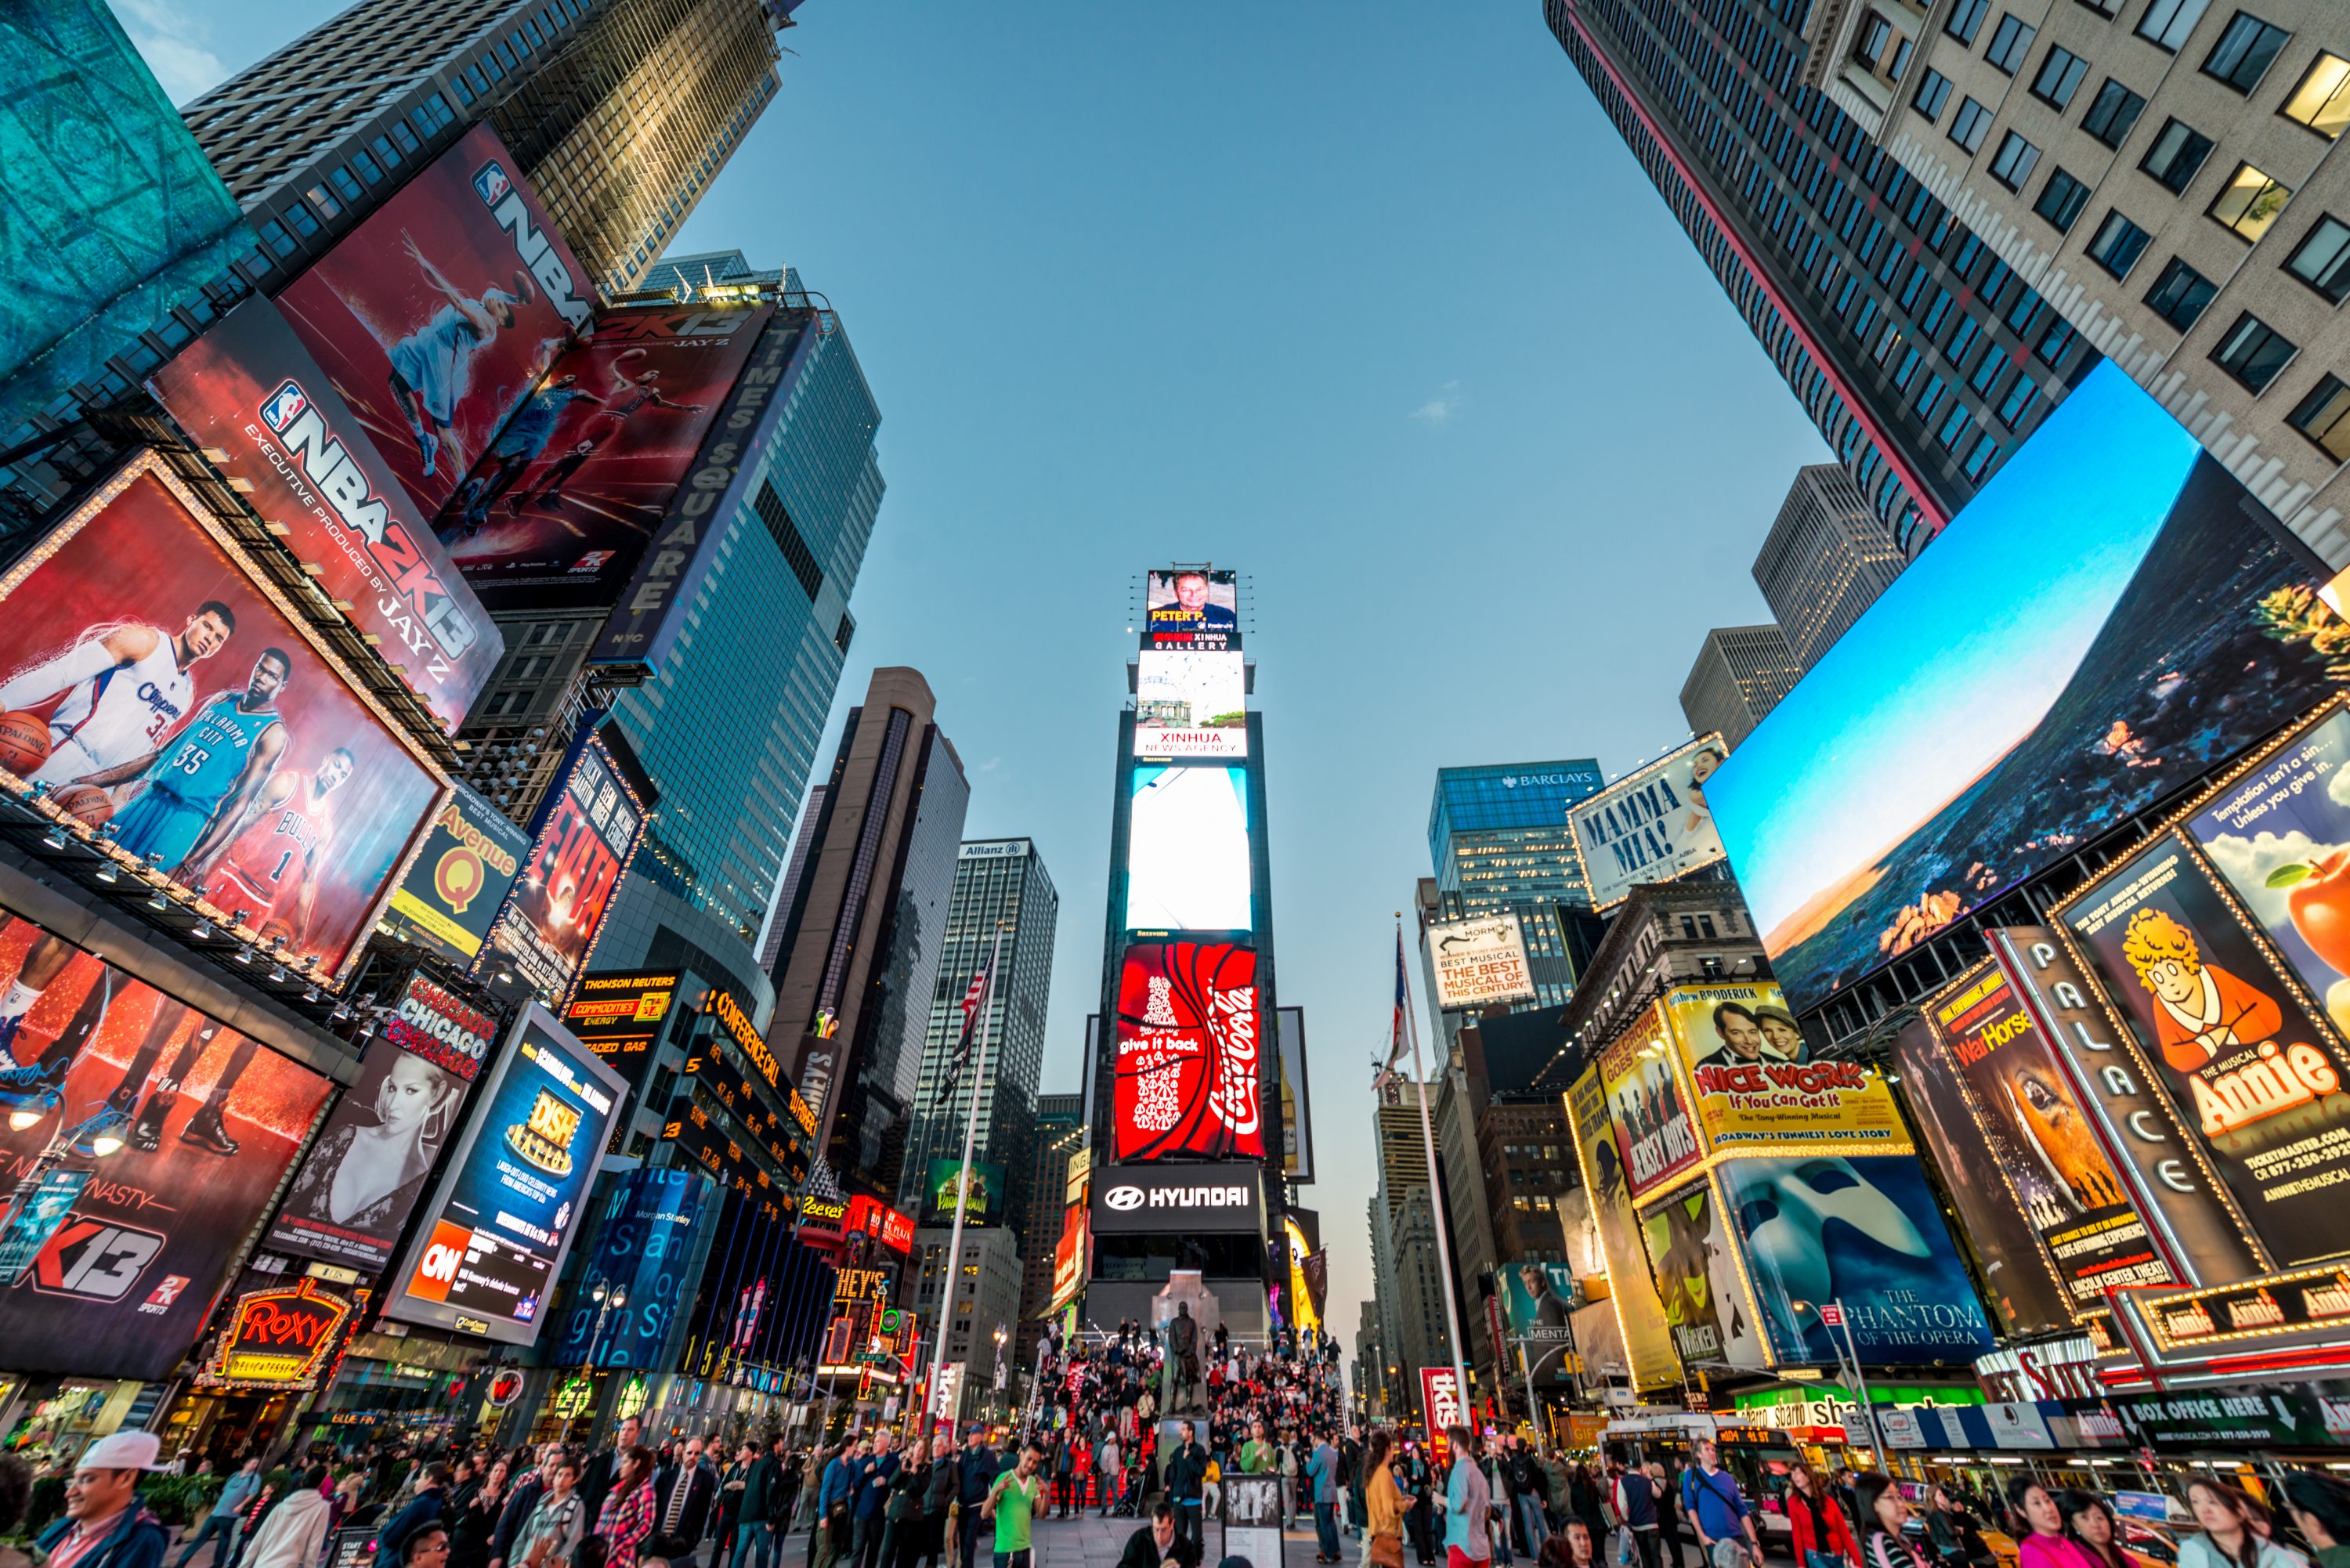 Lights in New York City's Times Square. (iStock Photo)